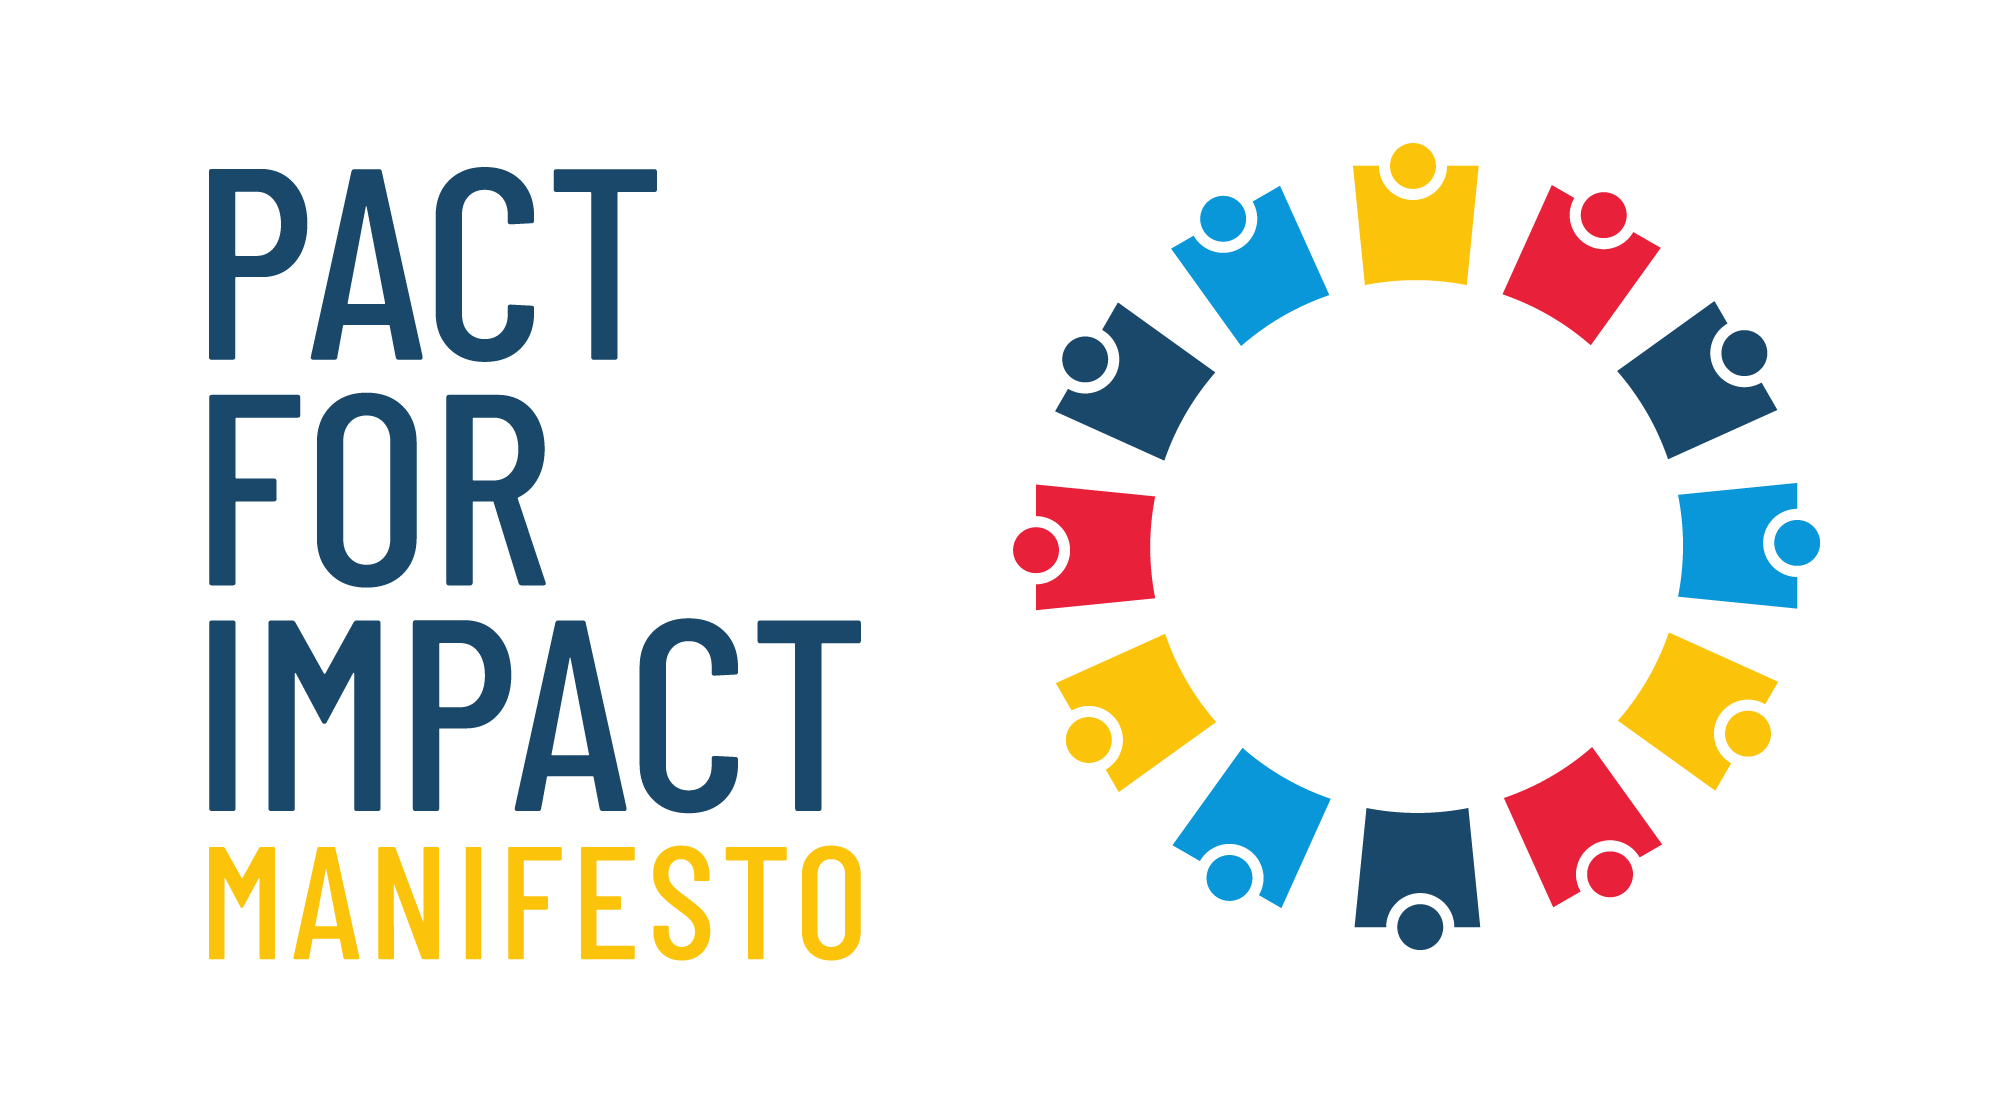 Le Manifeste Pact for Impact !